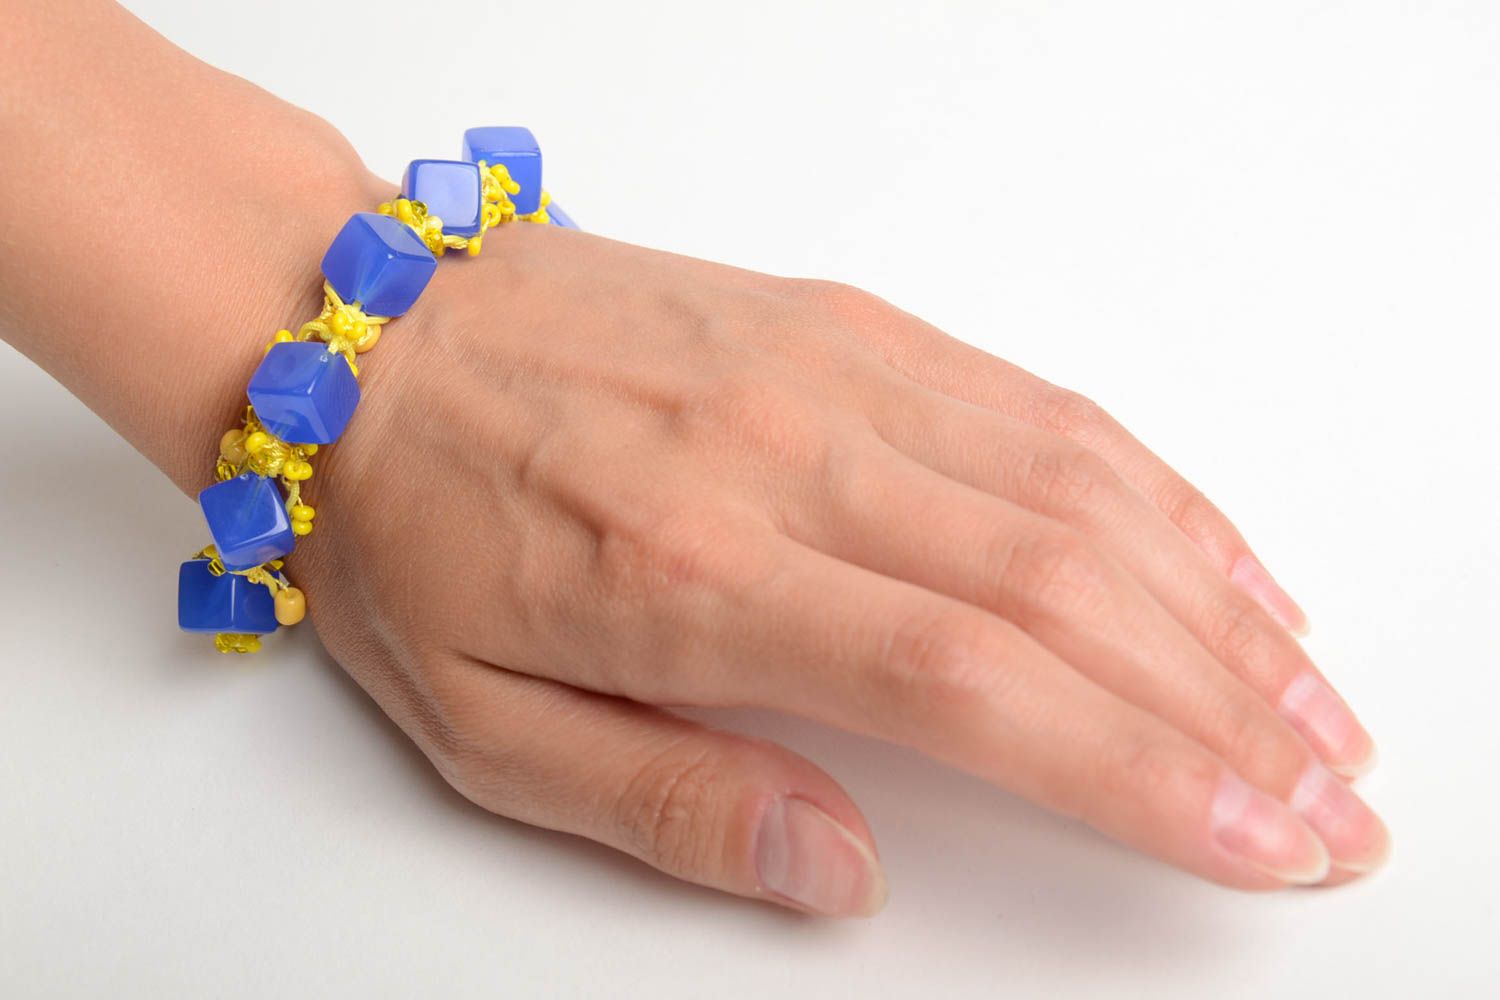 Handmade wrist bracelet crocheted of beads in yellow and blue color combination photo 2